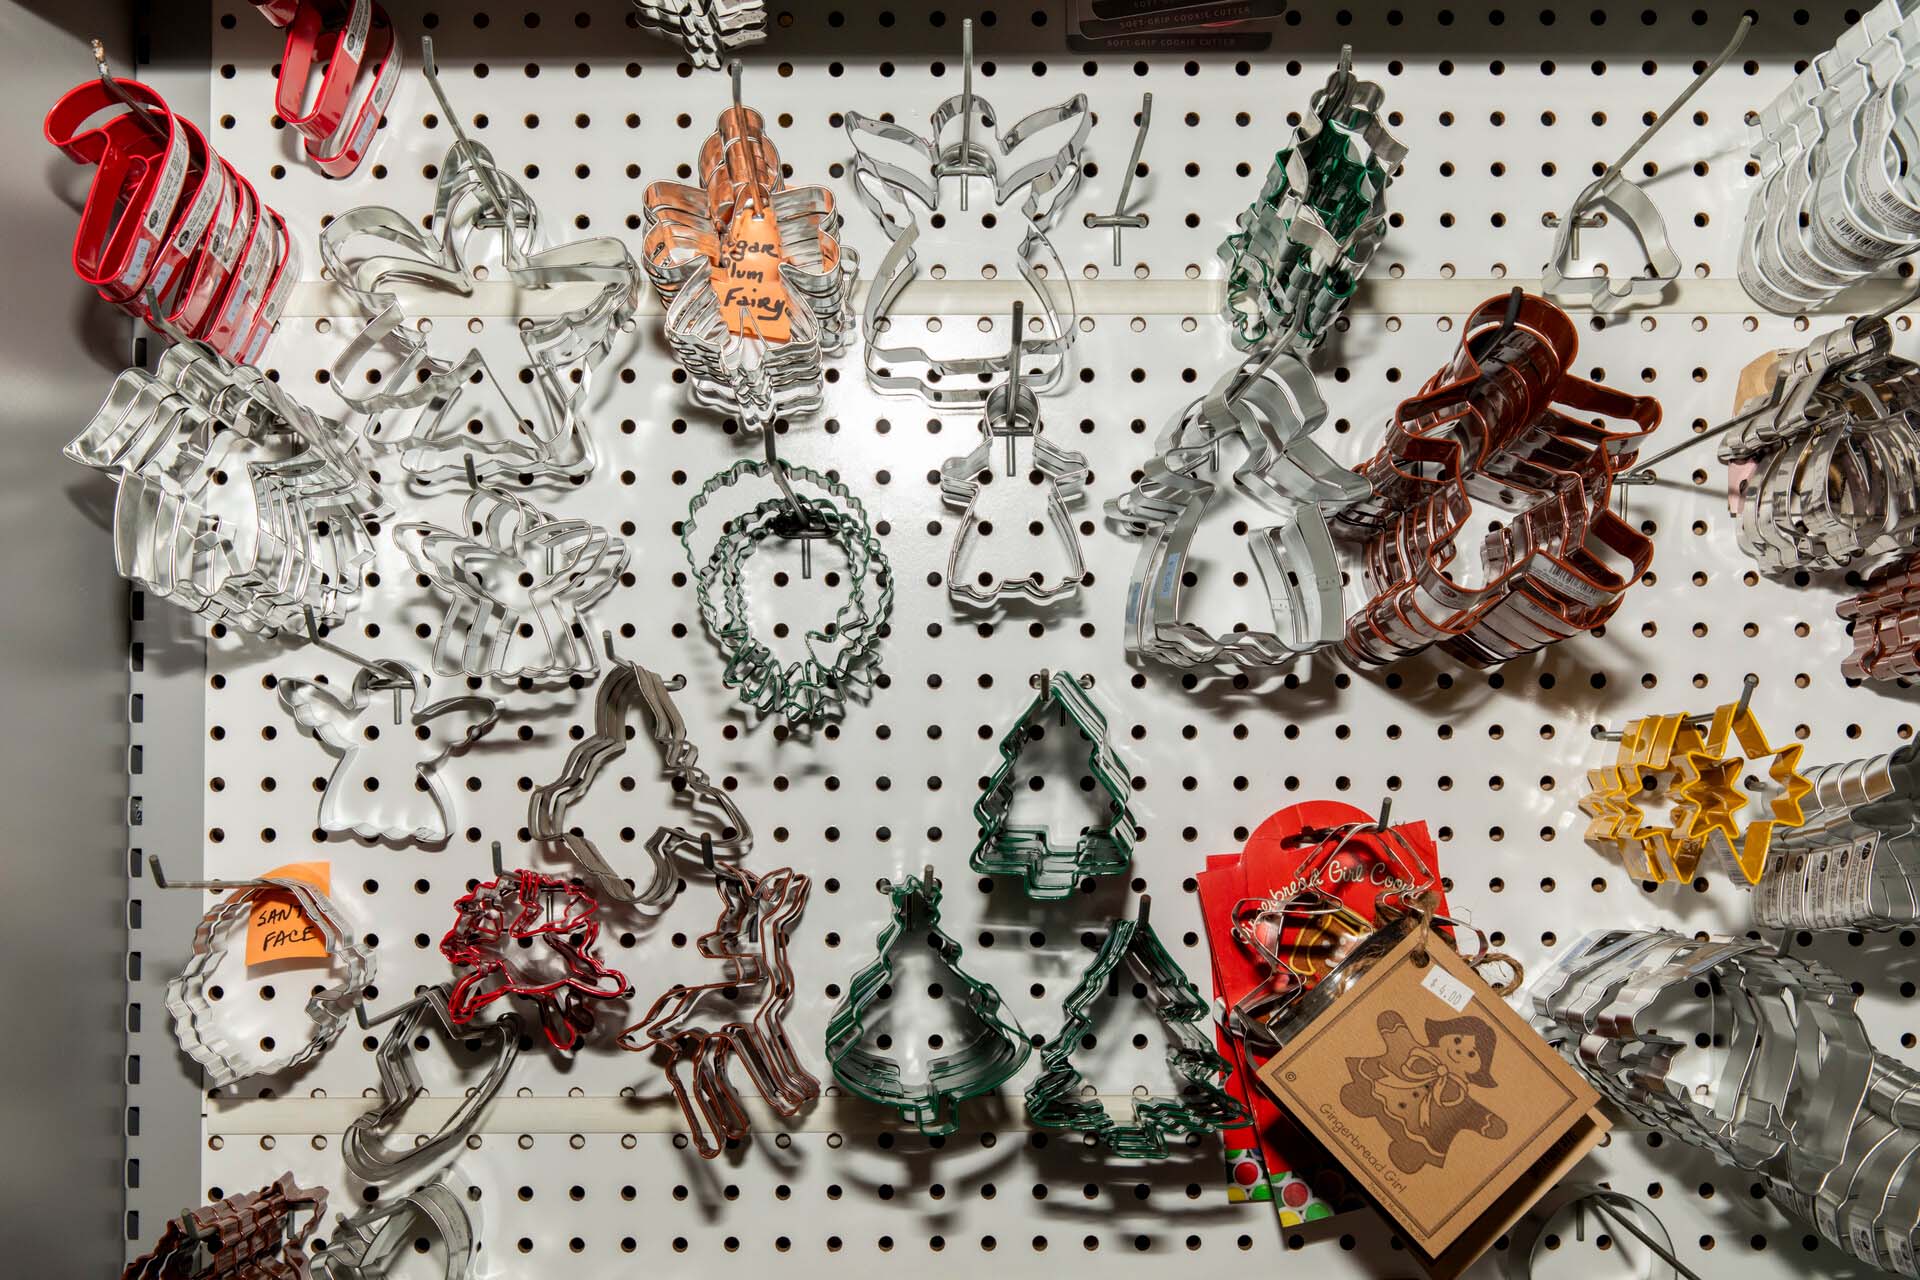 A display of holiday-themed cookie cutters hanging from hooks.